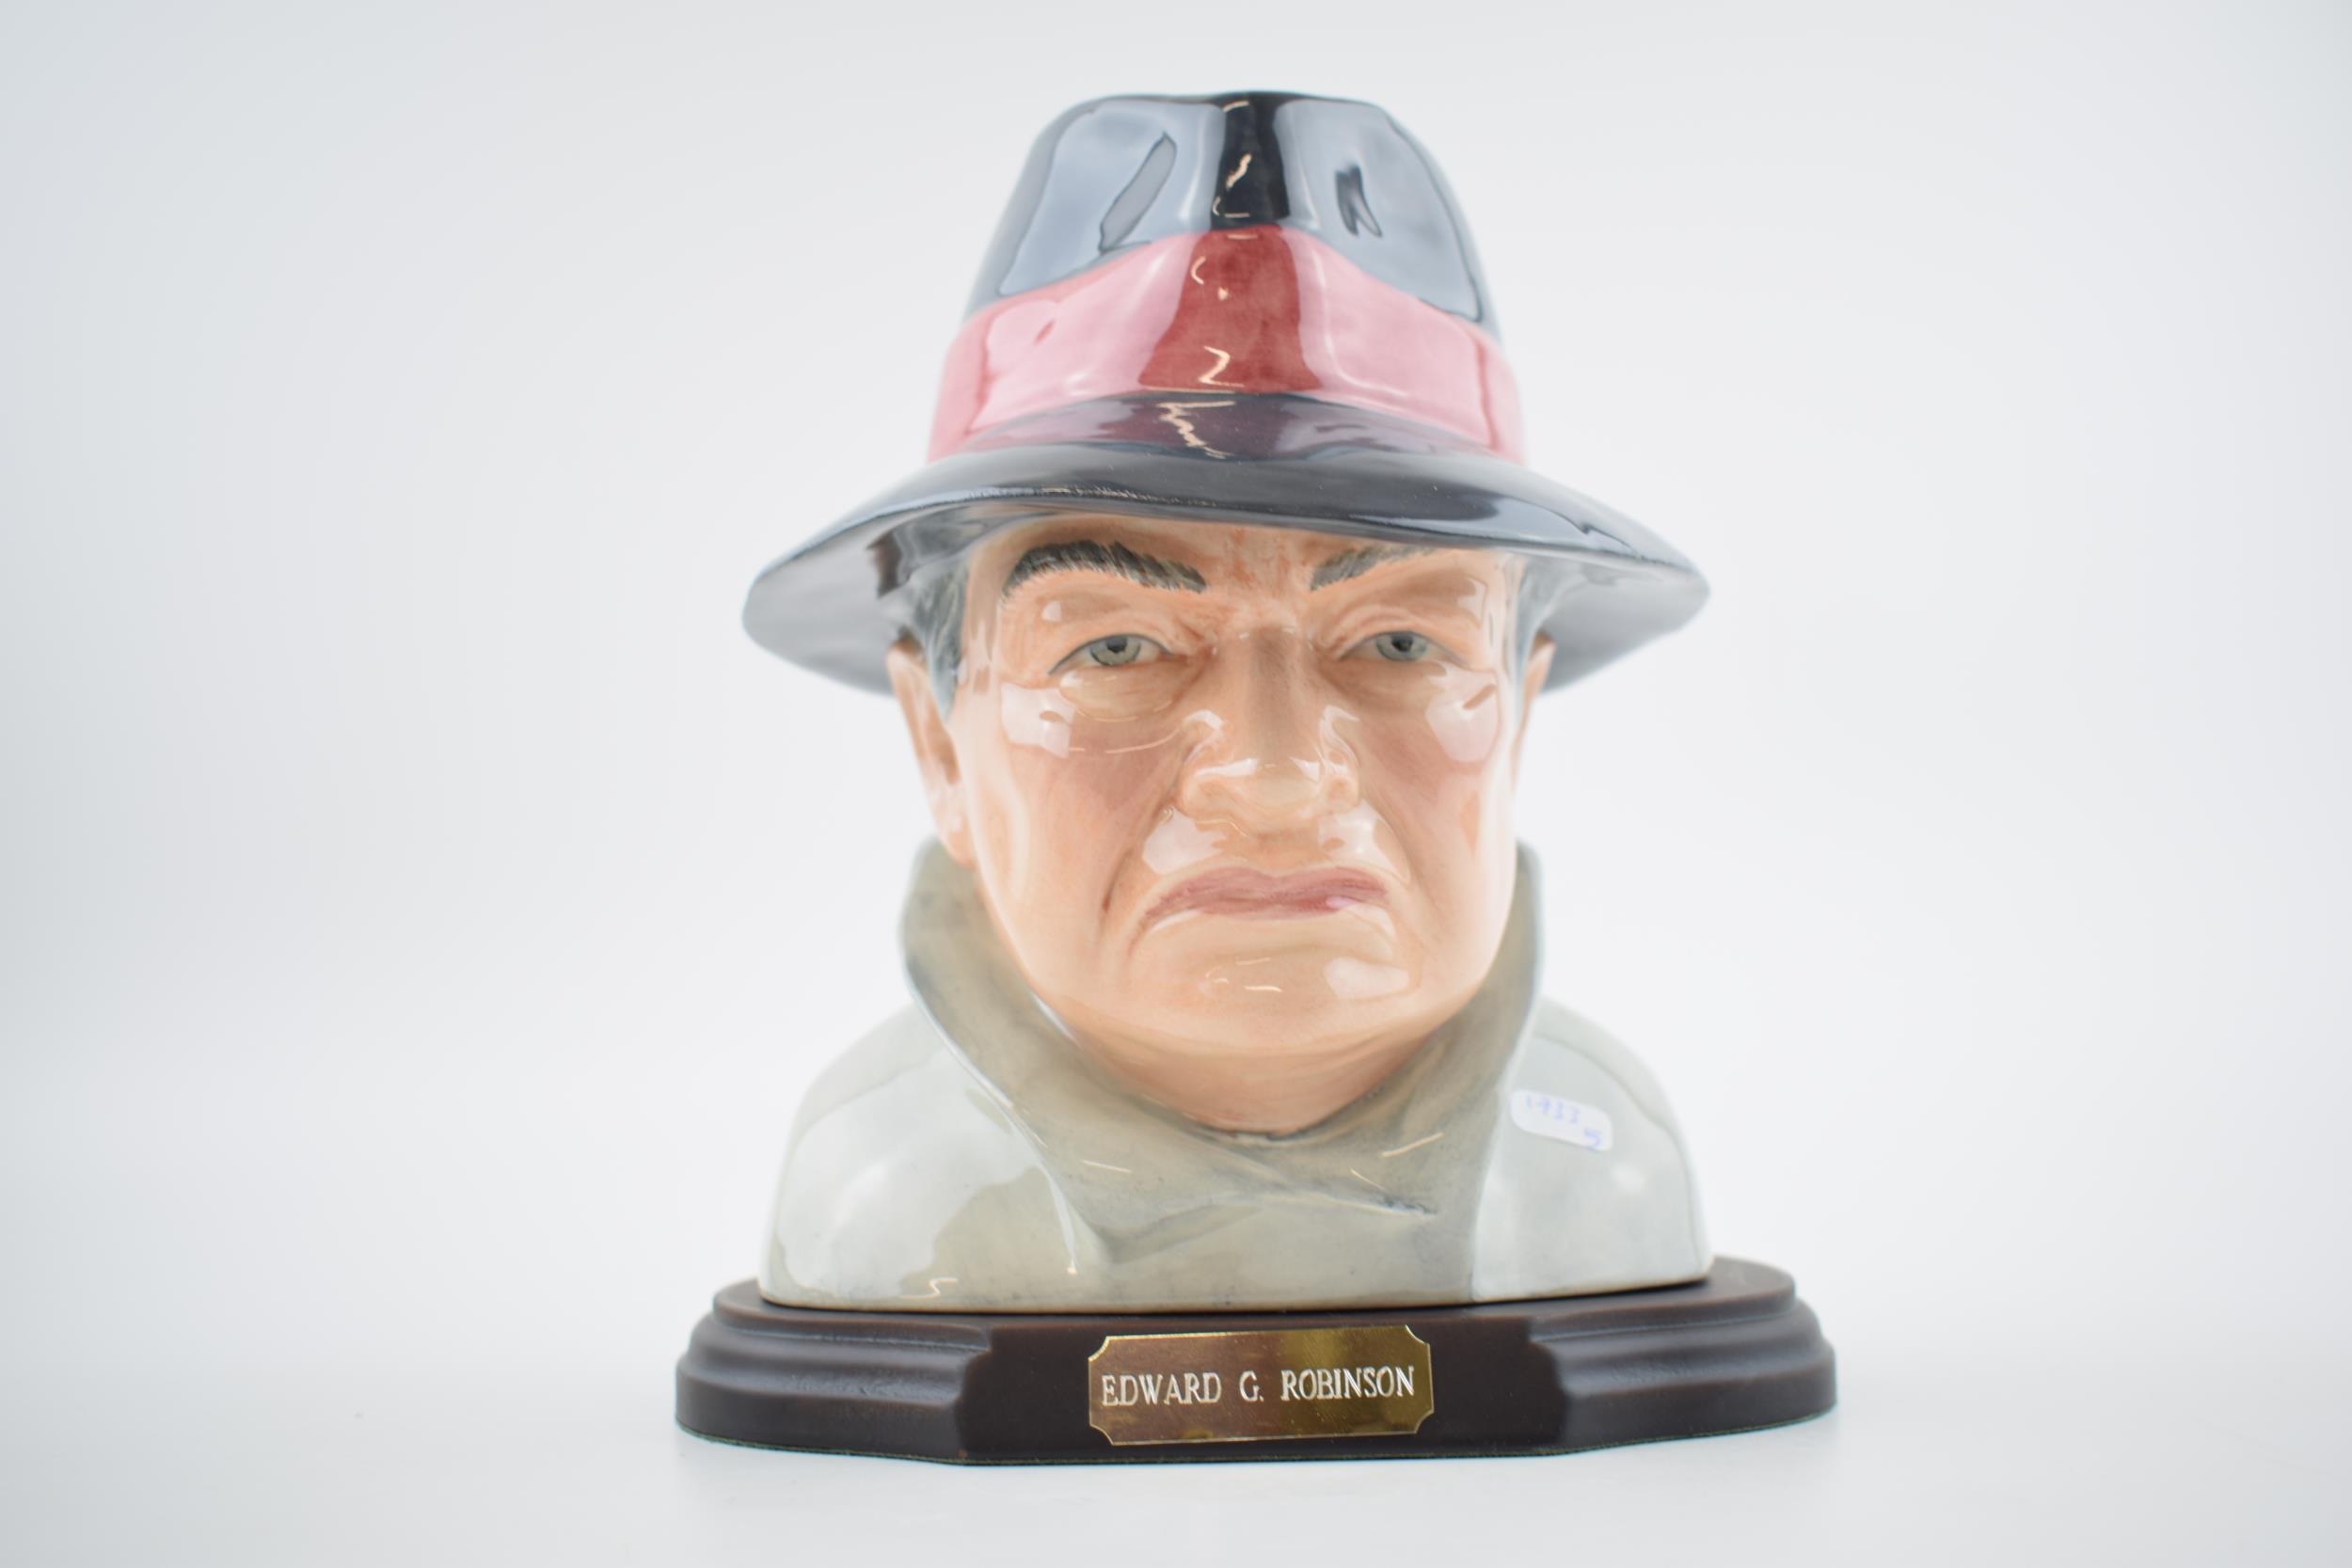 Bairstow Manor Pottery limited edition character bust Edward G Robinson on wooden base. In good